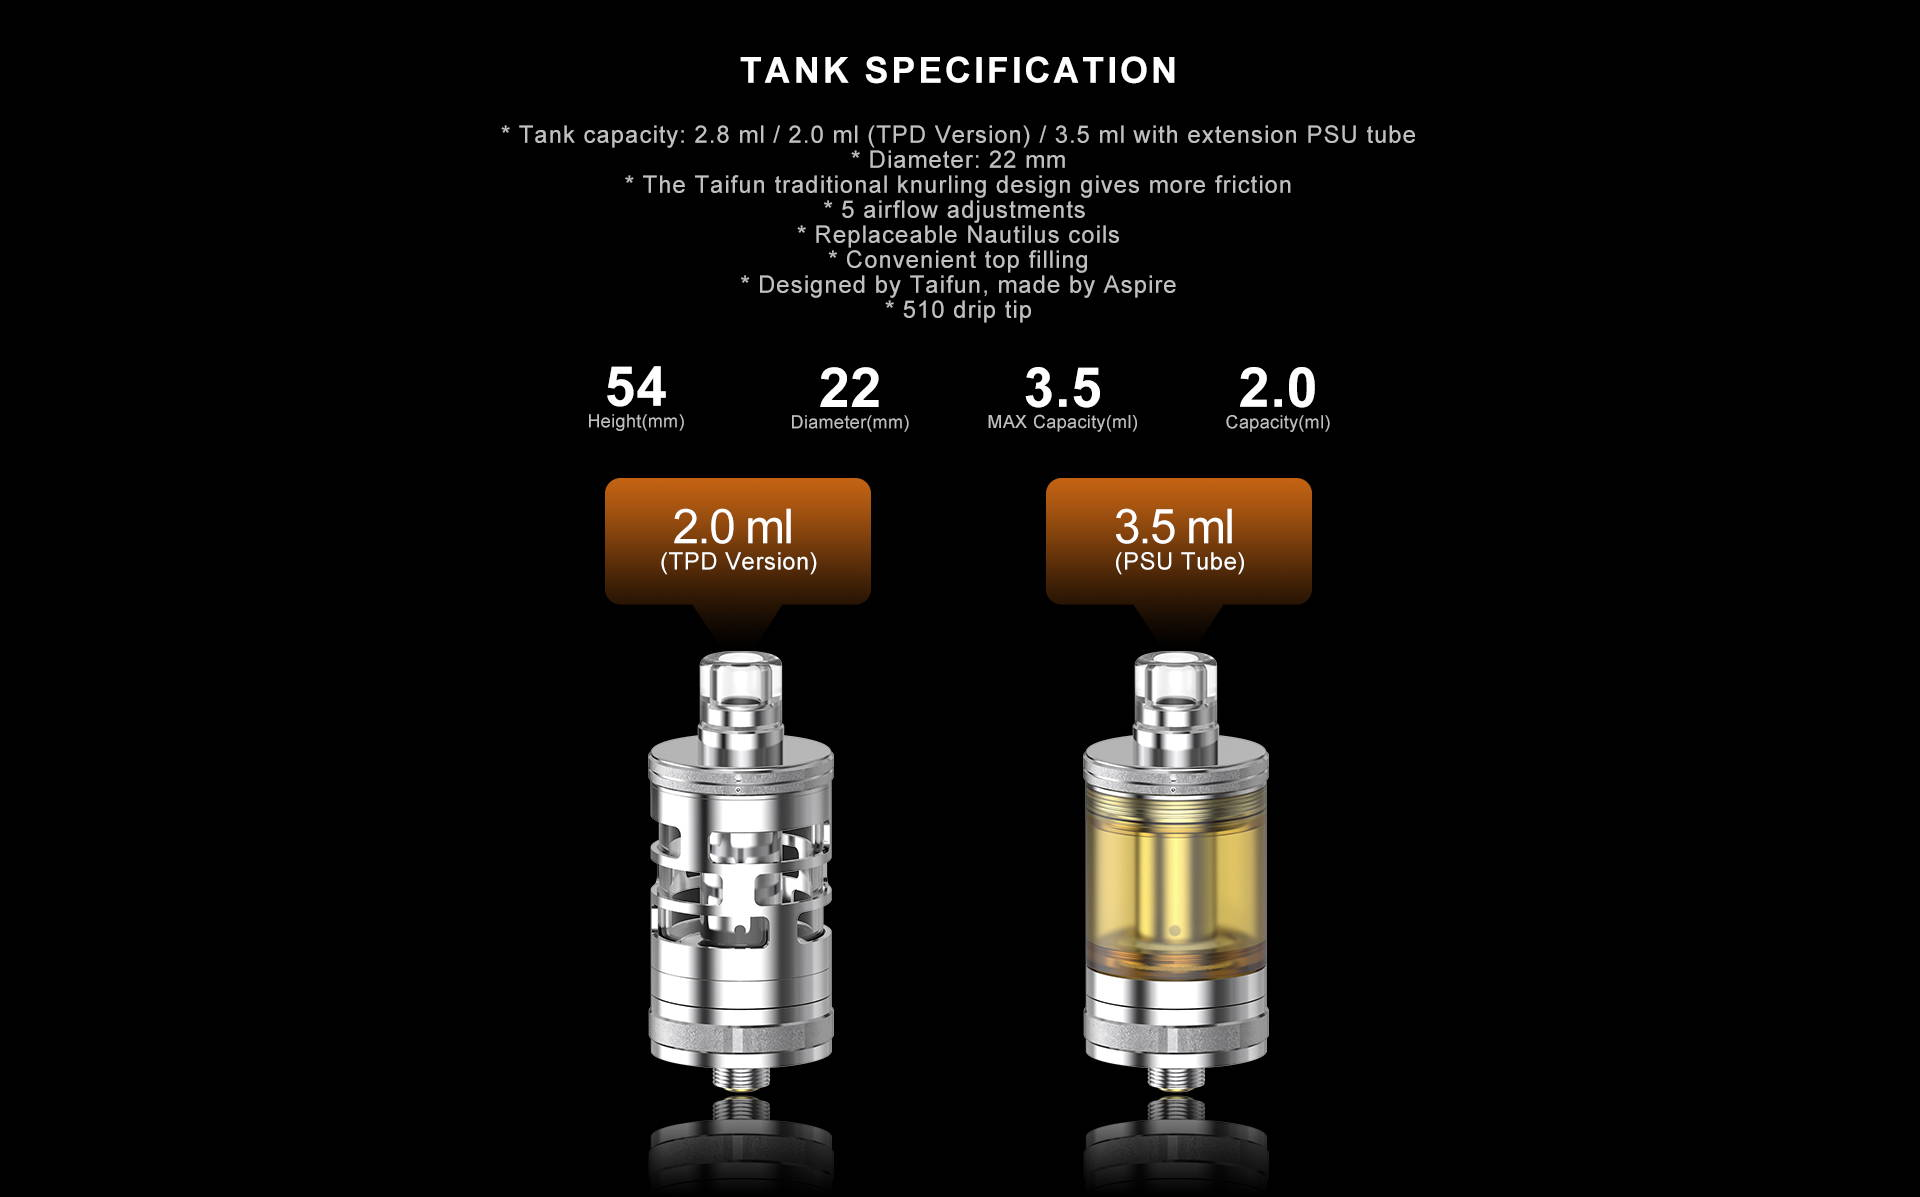 Tank capacity: 2.8 ml / 2.0 ml (TPD Version) / 3.5 ml with extension PSU tube * Diameter: 22 mm * The Taifun traditional knurling design gives more friction * 5 airflow adjustments  * Replaceable Nautilus coils * Convenient top filling * Designed by Taifun, made by Aspire * 510 drip tip